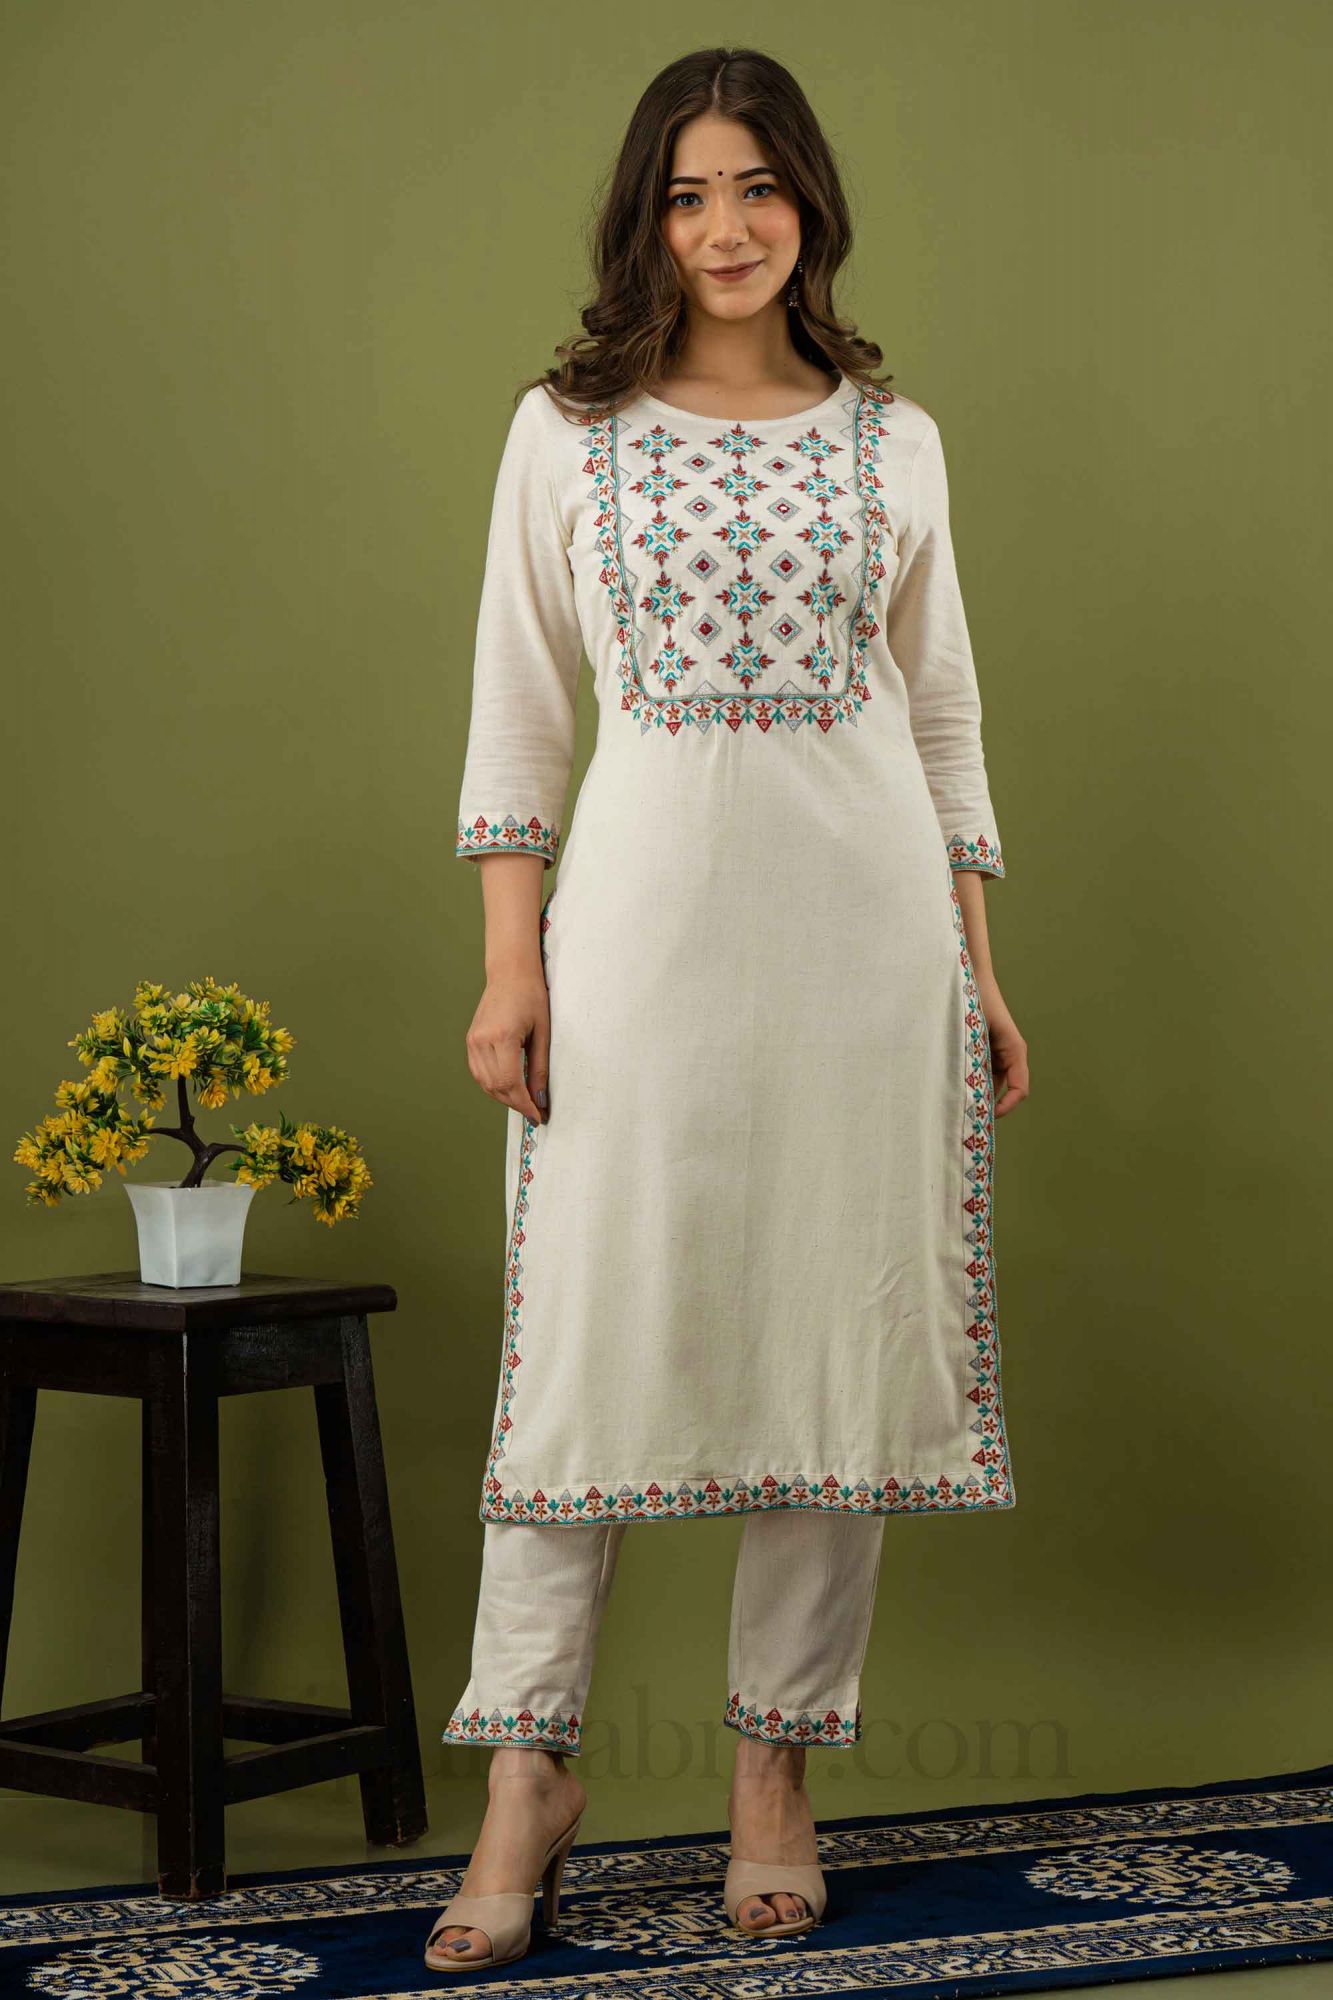 Long Kurtis Can Be Statement Pieces If You Know How to Style Them Properly!  10 Amazing